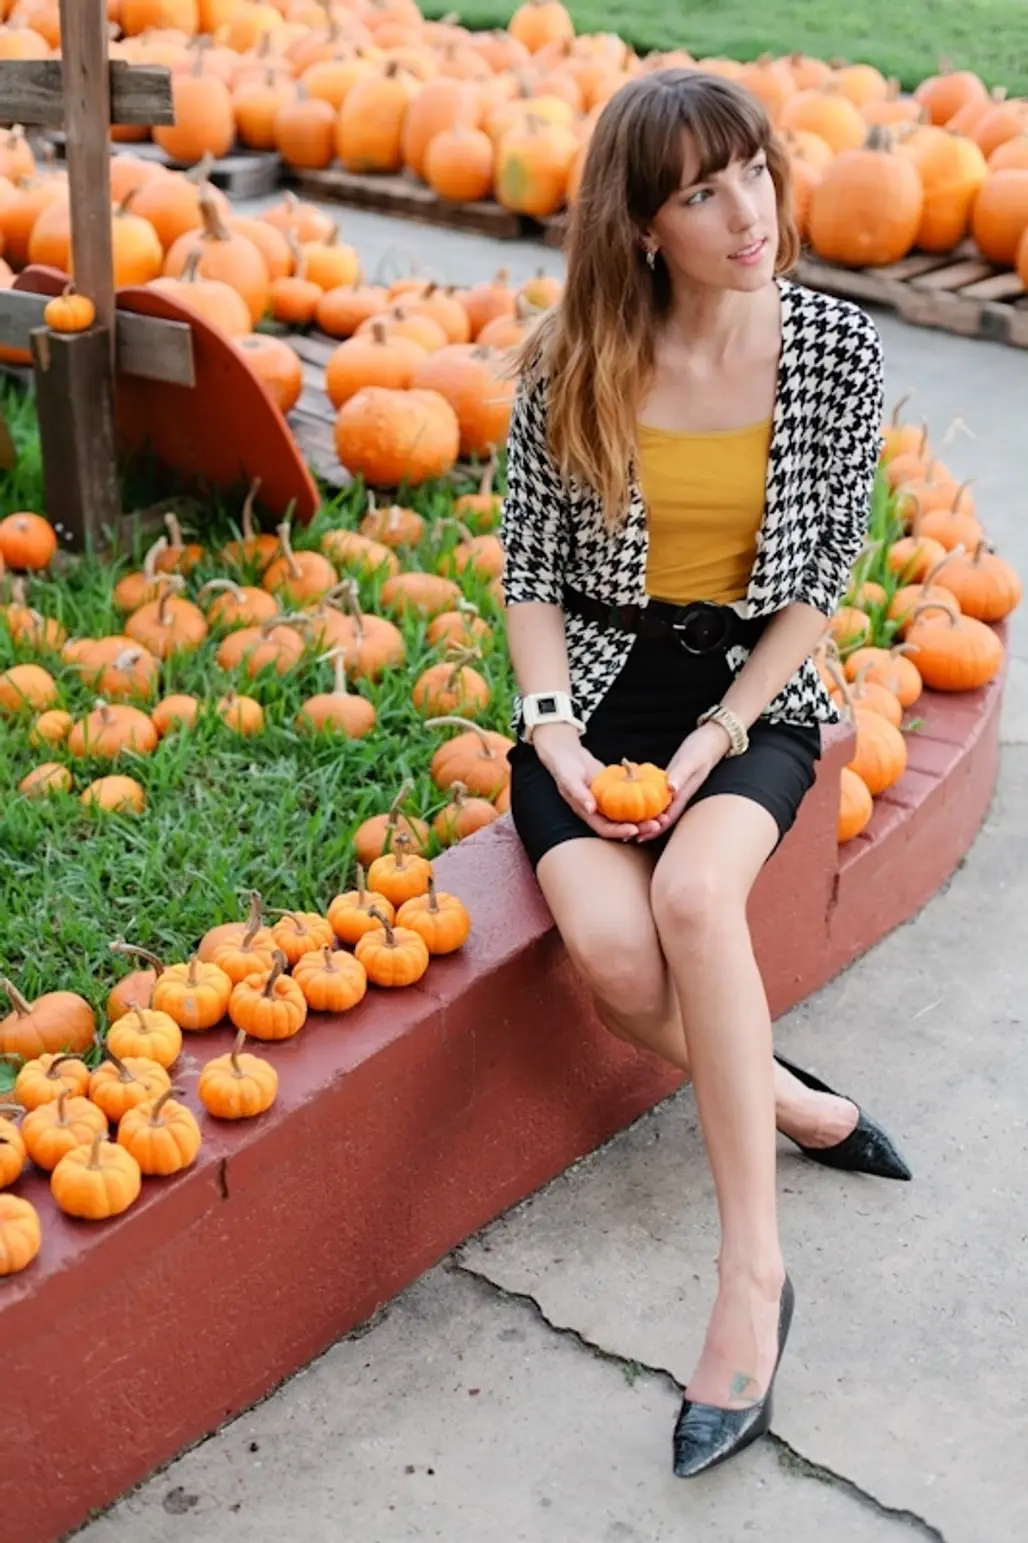 Posing in the Pumpkin Patch